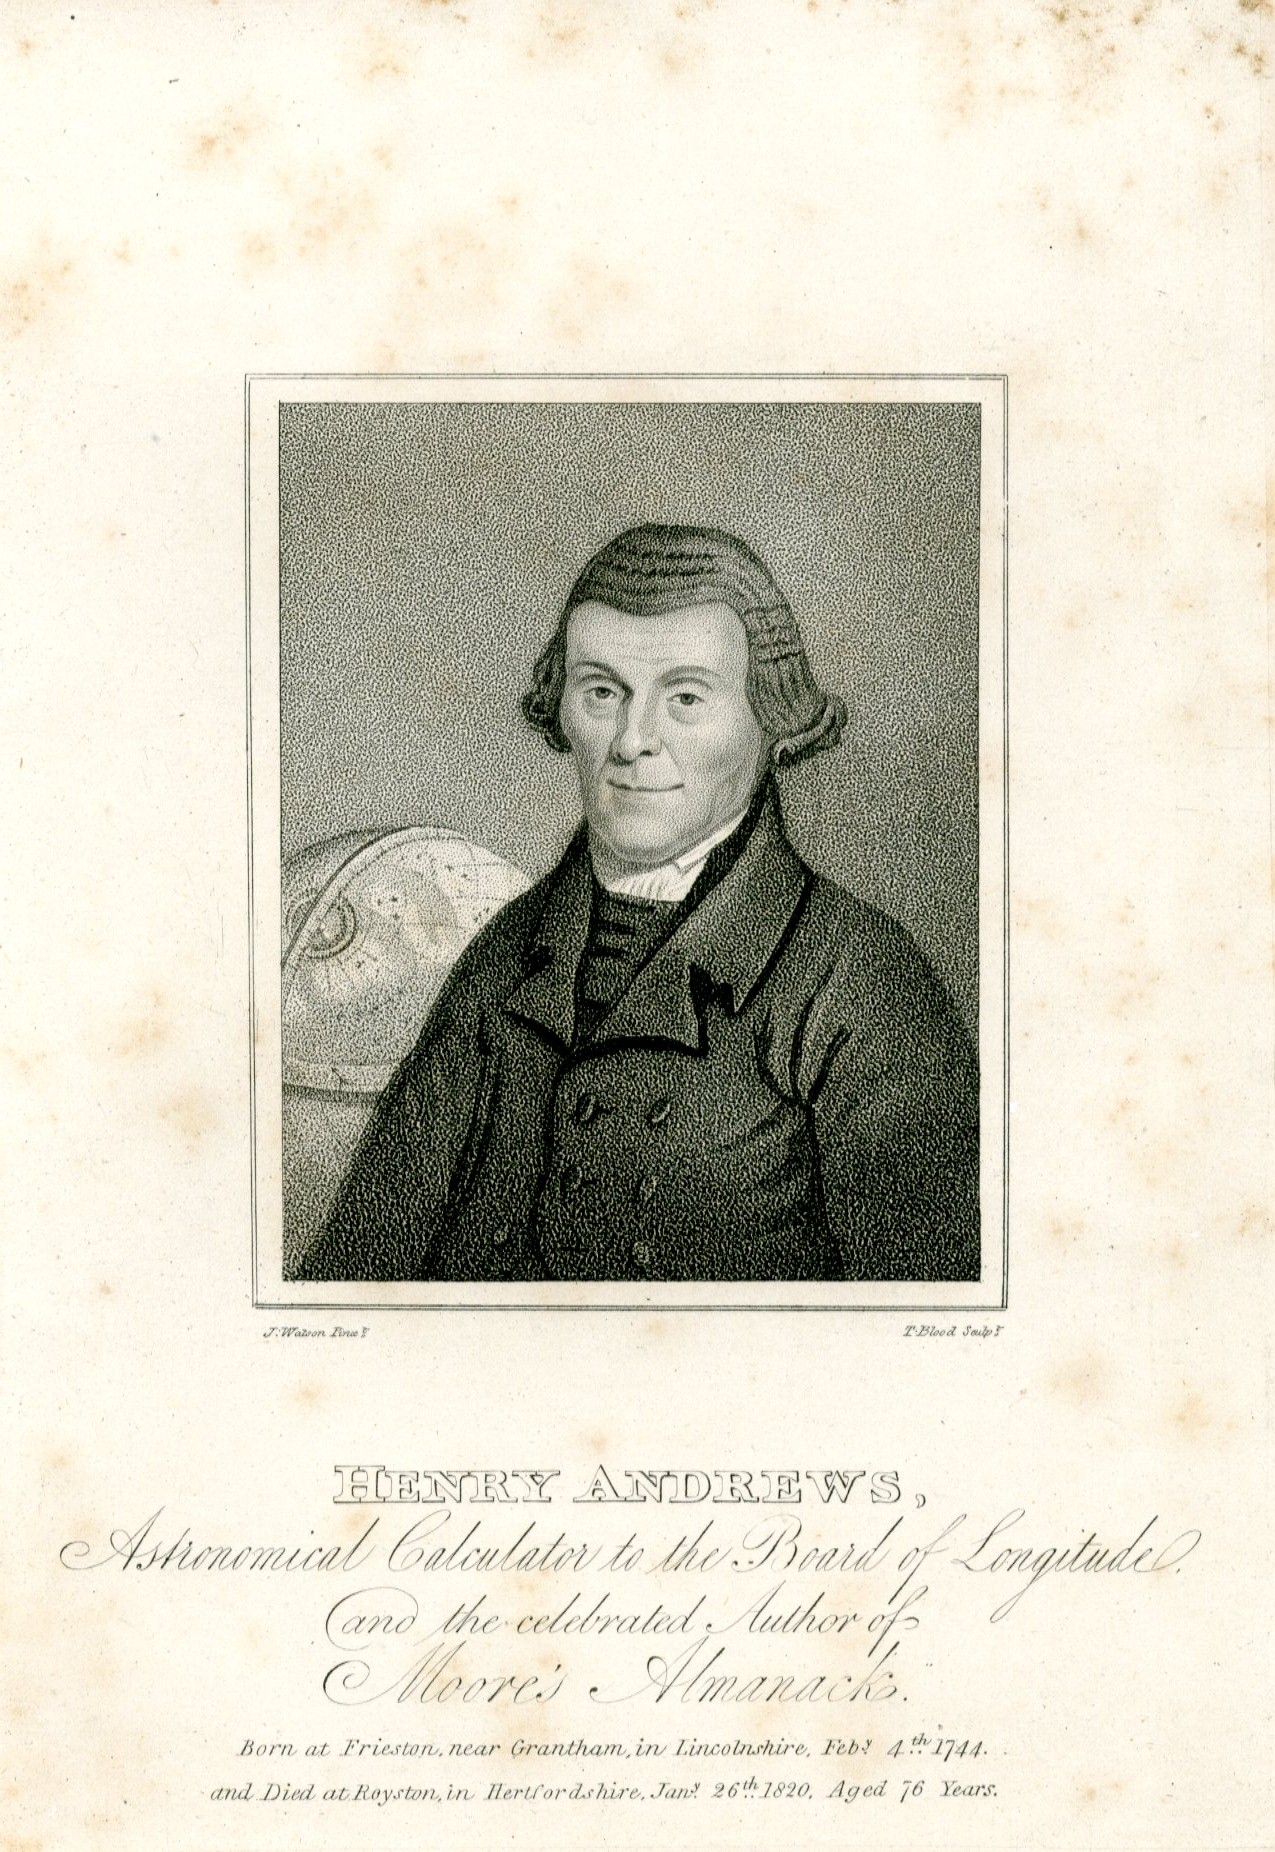 Henry Andrews - engraving by Thomas Blood